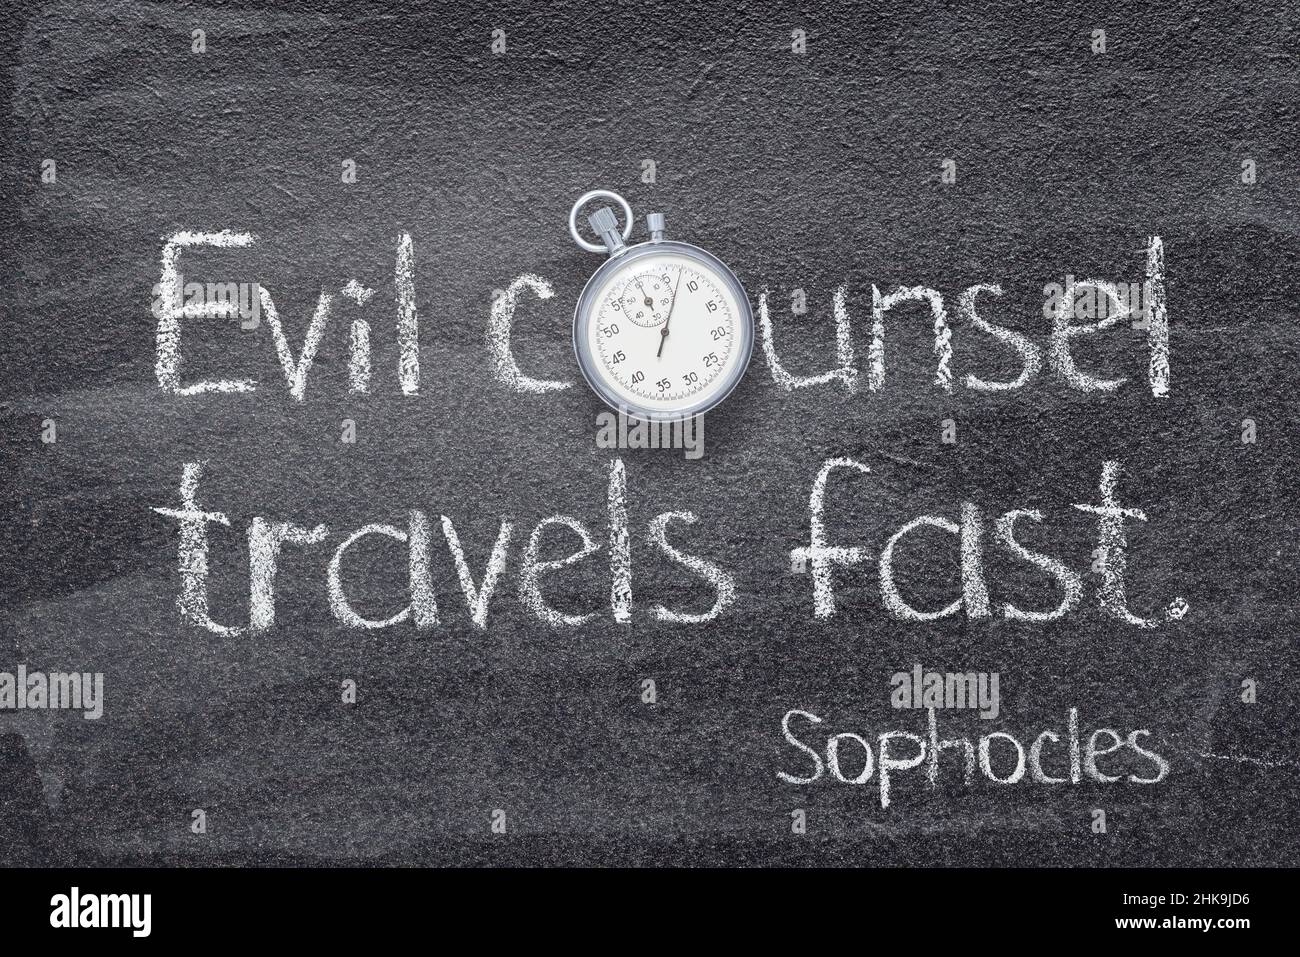 Evil counsel travels fast - quote of ancient Greek philosopher Sophocles written on chalkboard with vintage stopwatch Stock Photo